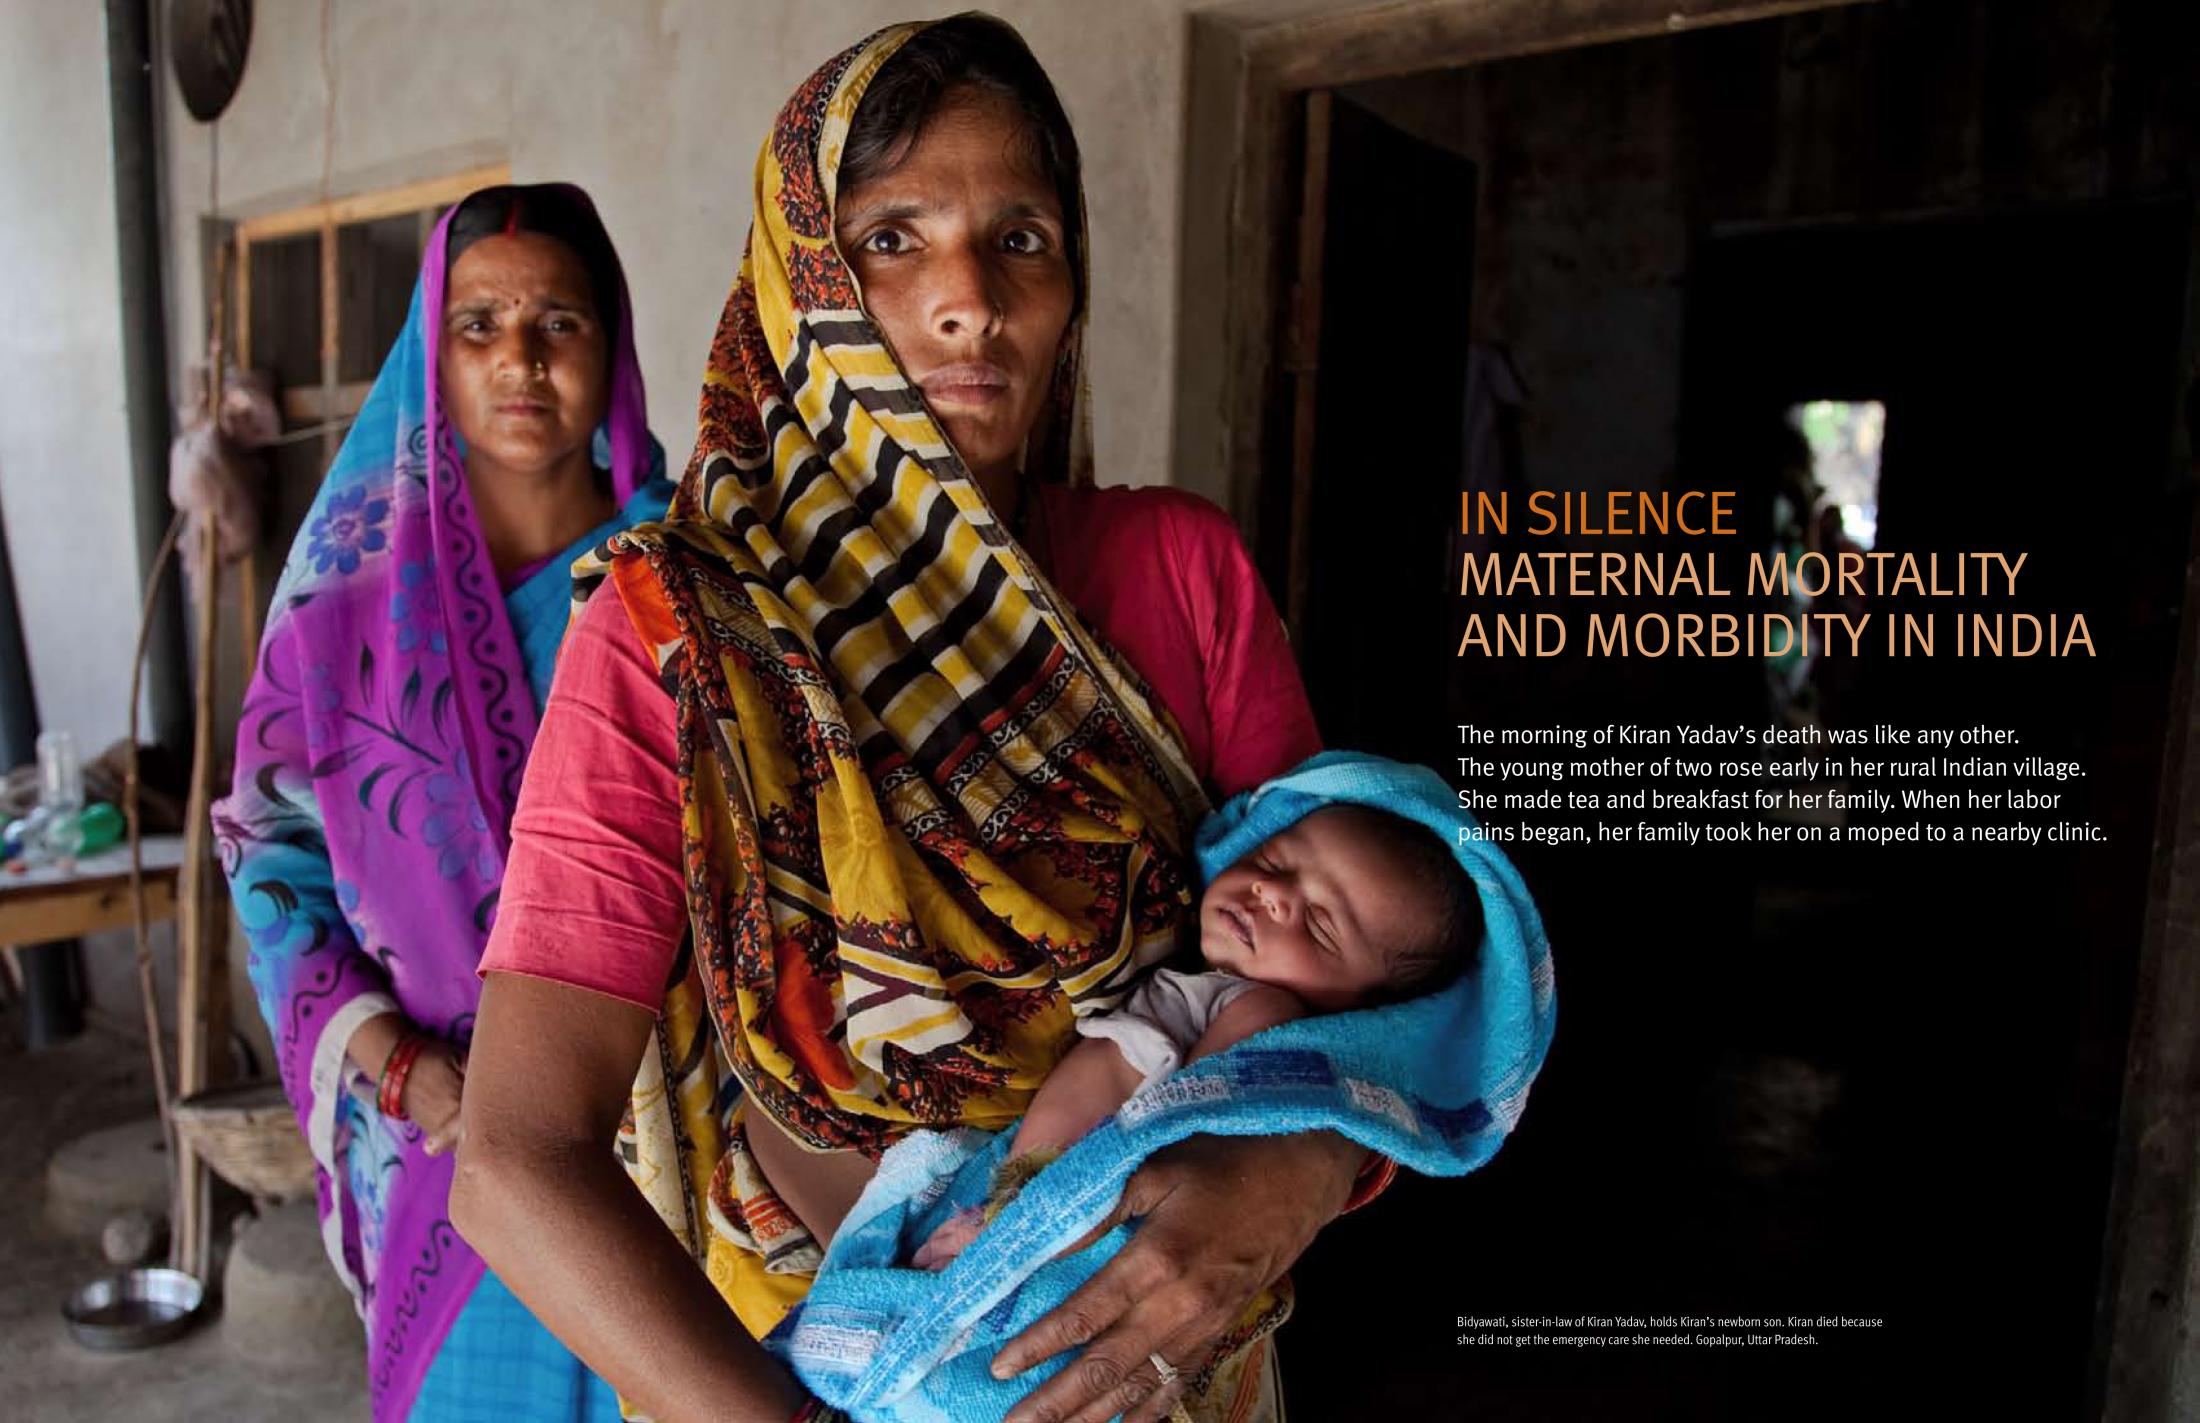 Maternal Mortality, India (2009) Tearsheets - Human Rights Watch Brochure "In Silence".